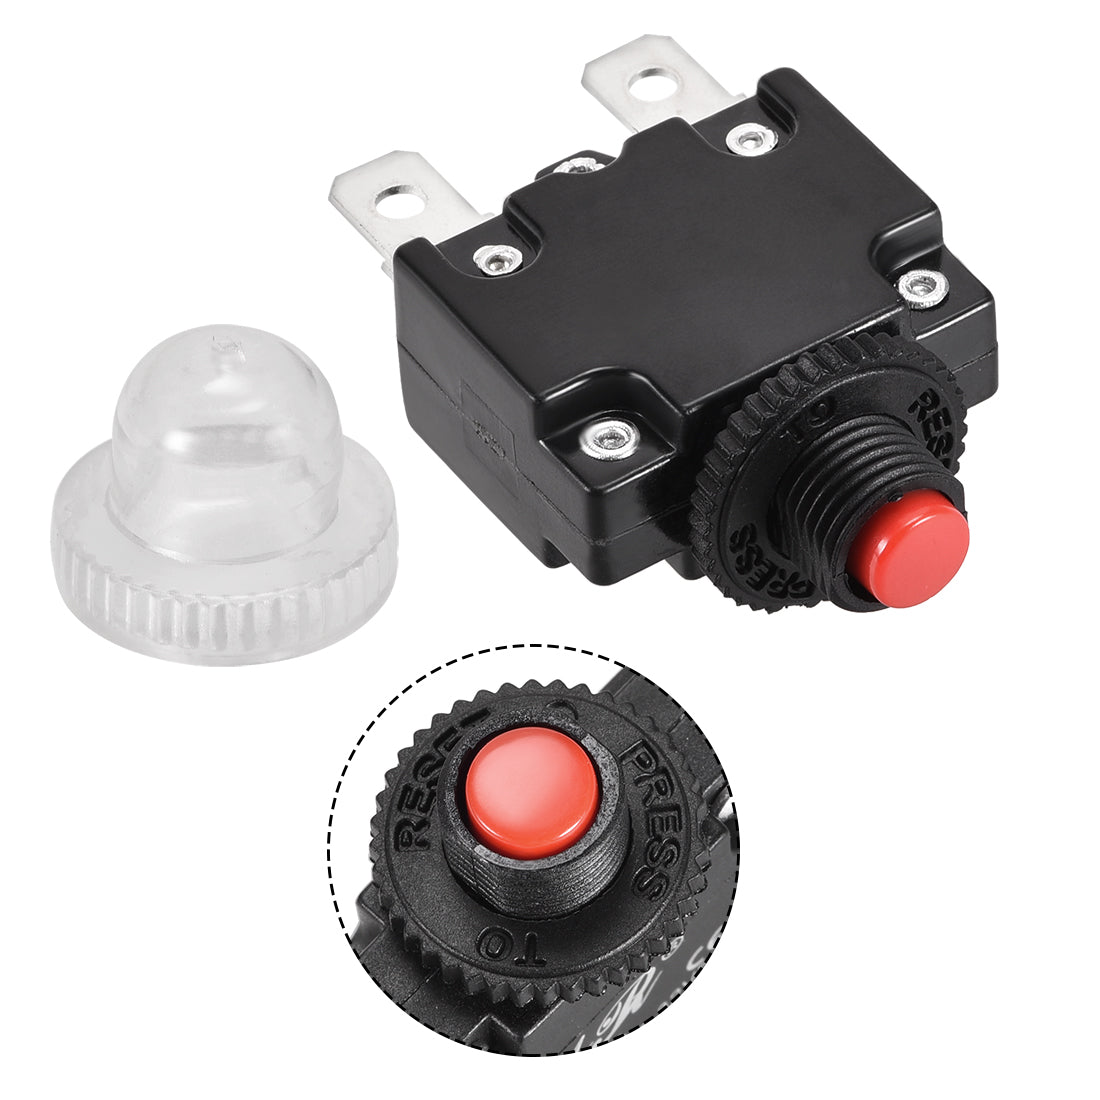 uxcell Uxcell Thermal Circuit Breakers 18A 125/250V AC 32V DC Push Button Reset Overload Protector Switch with Waterproof Cap 2 Pcs